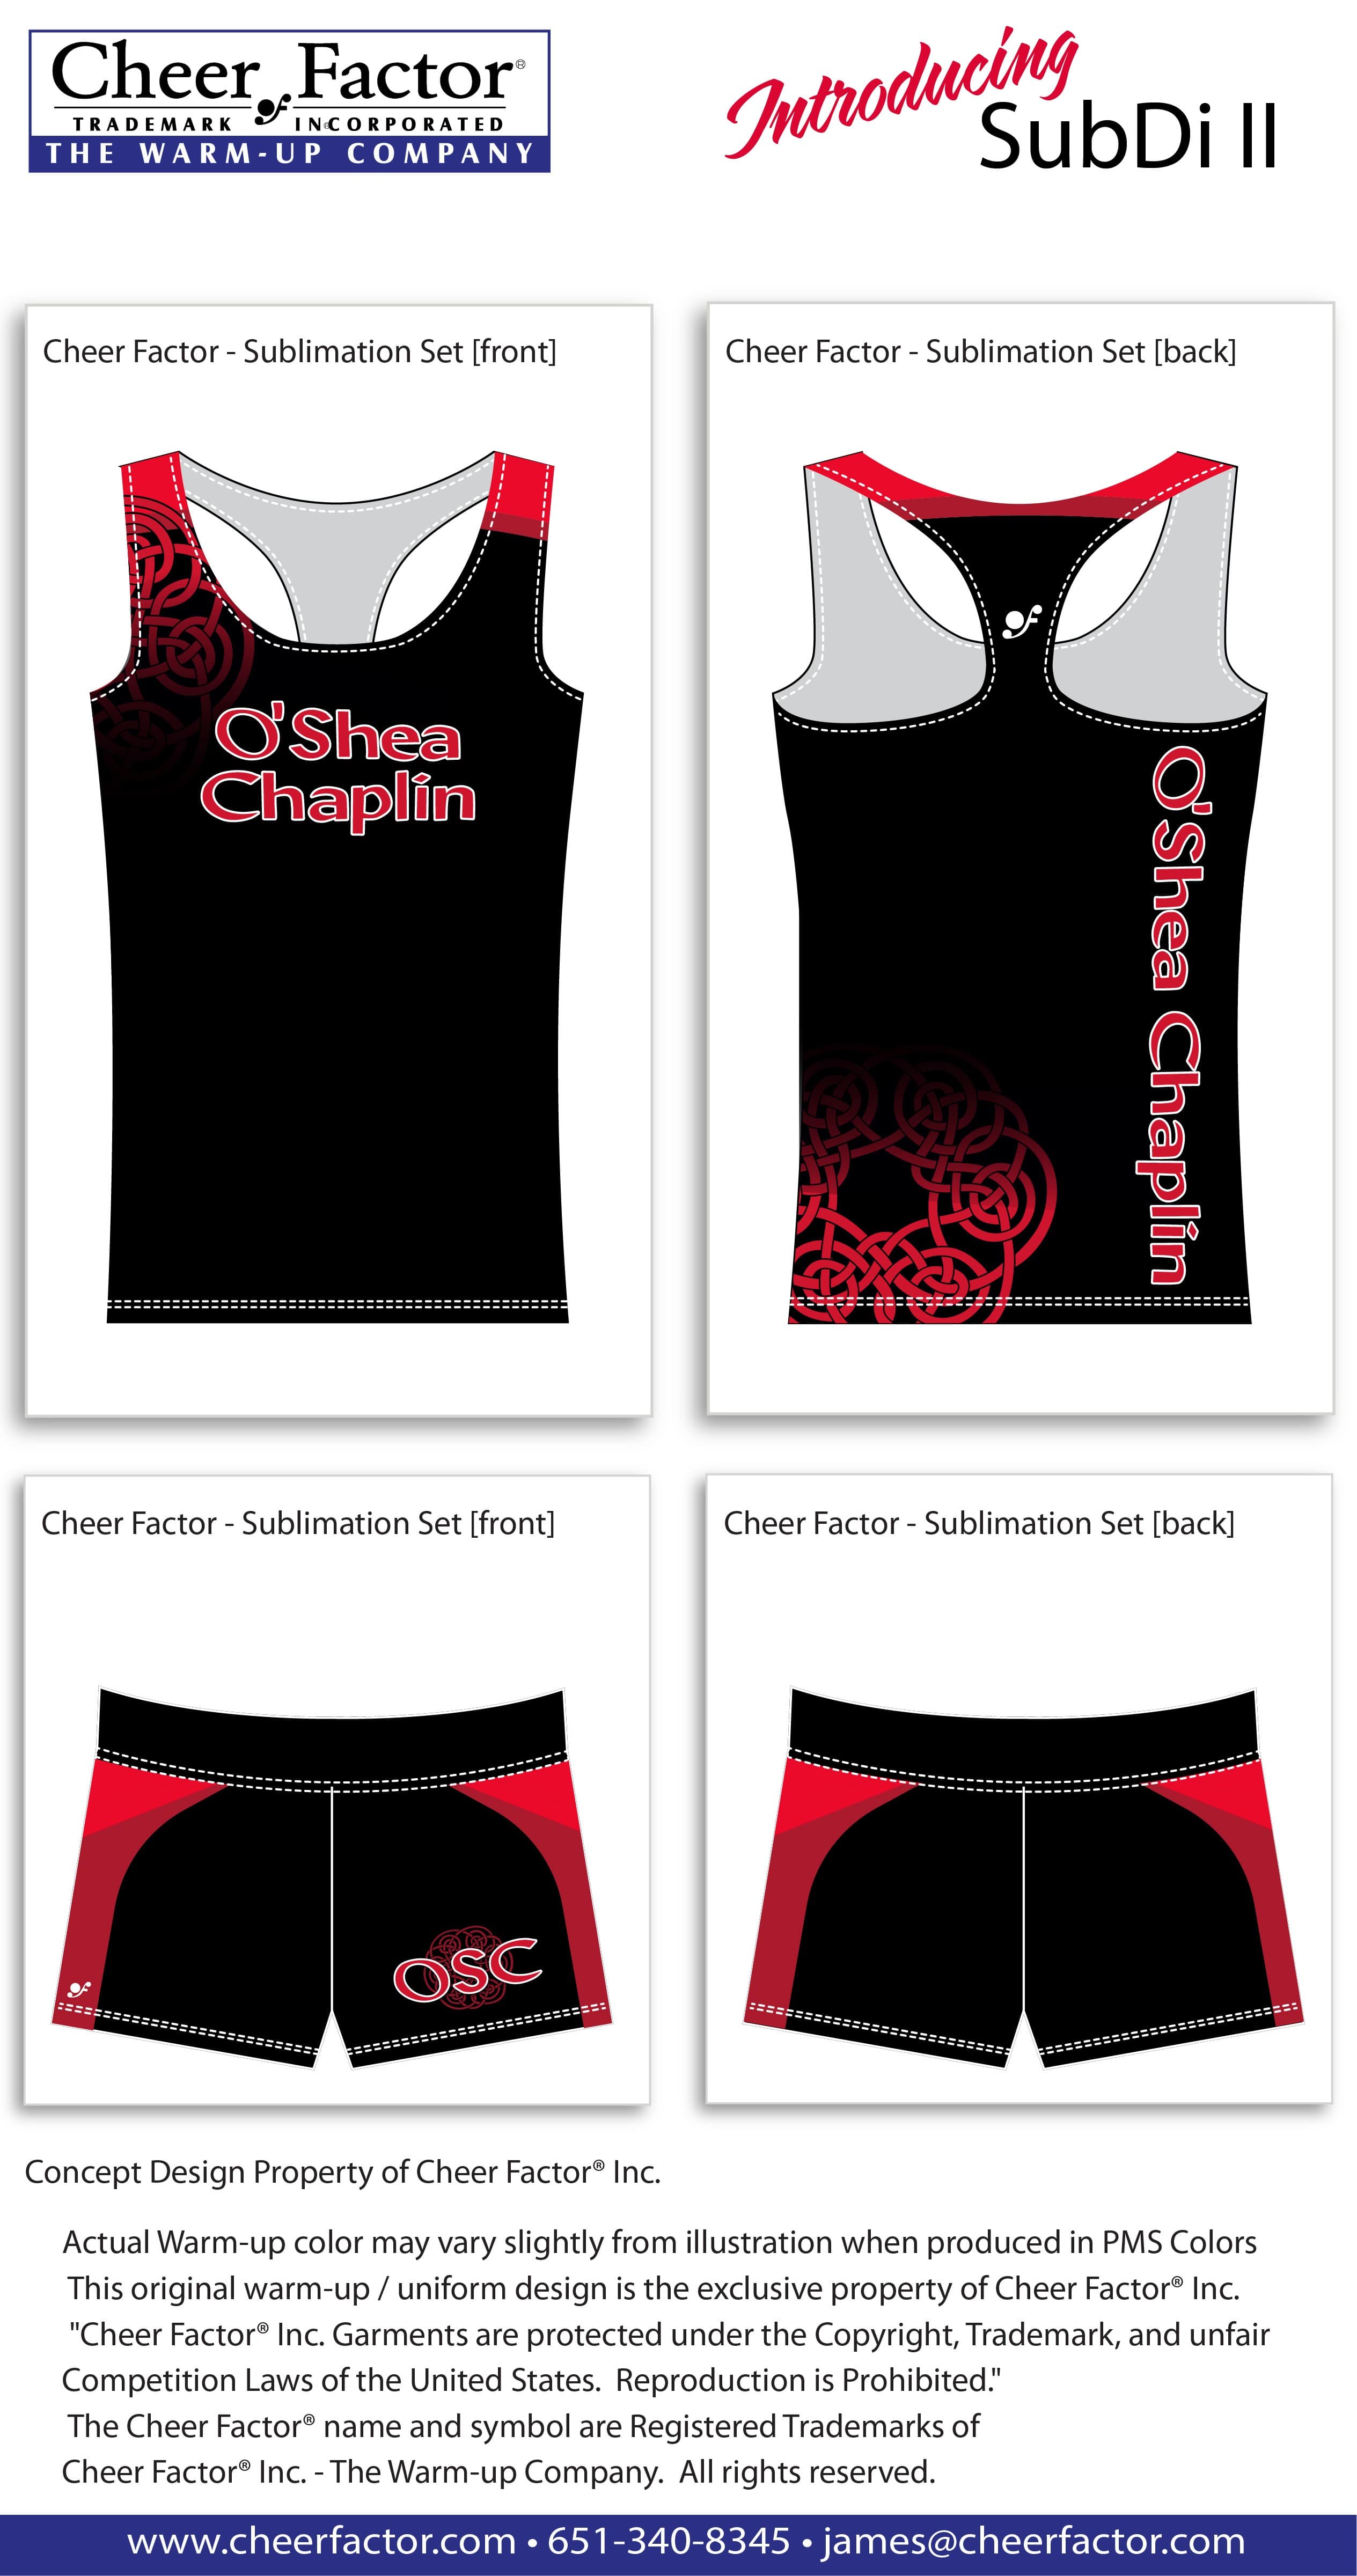 Produce matching apparel with Cheer Factor sublimation apparel